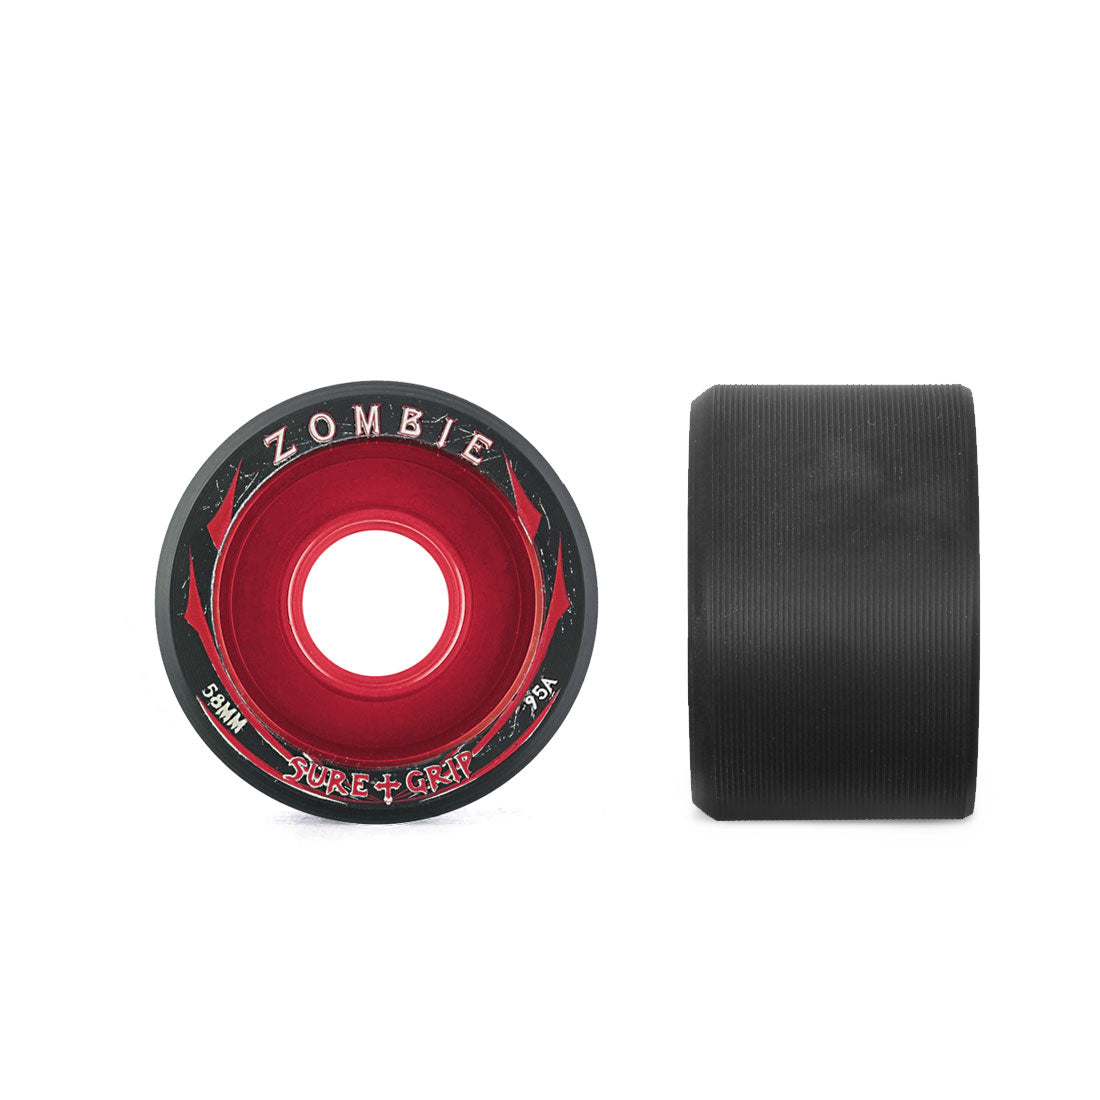 Sure-Grip Zombie Low 58x38mm 4pk Red 95A Roller Skate Wheels